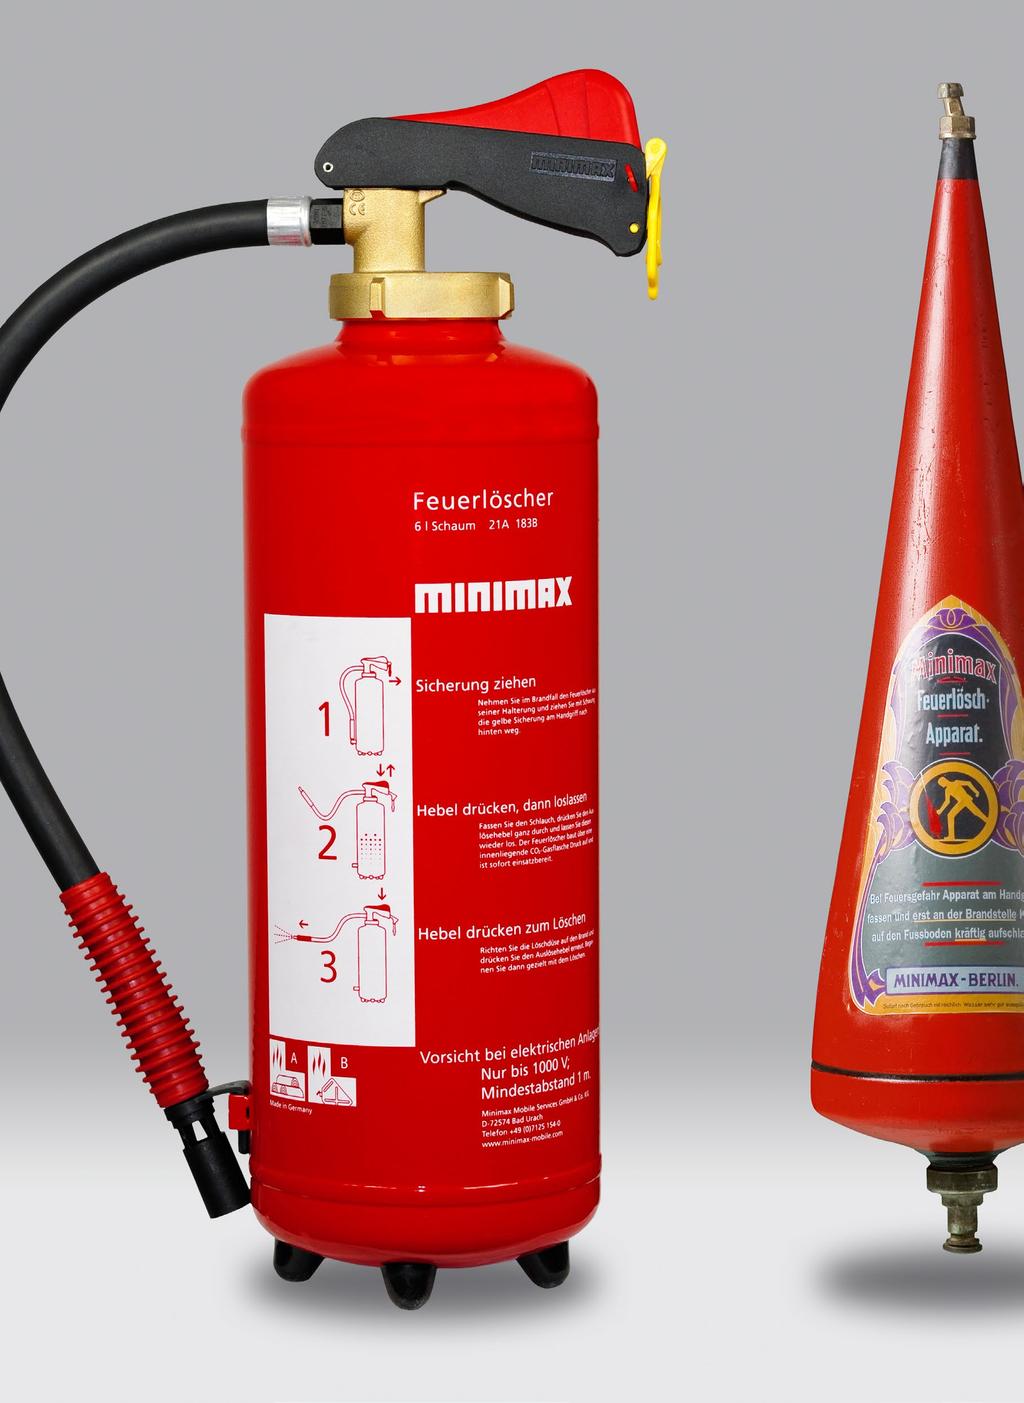 Minimax: Product Graphics Even non-professionals can understand the operating instructions at first go, which makes a successful extinguishing very probable.